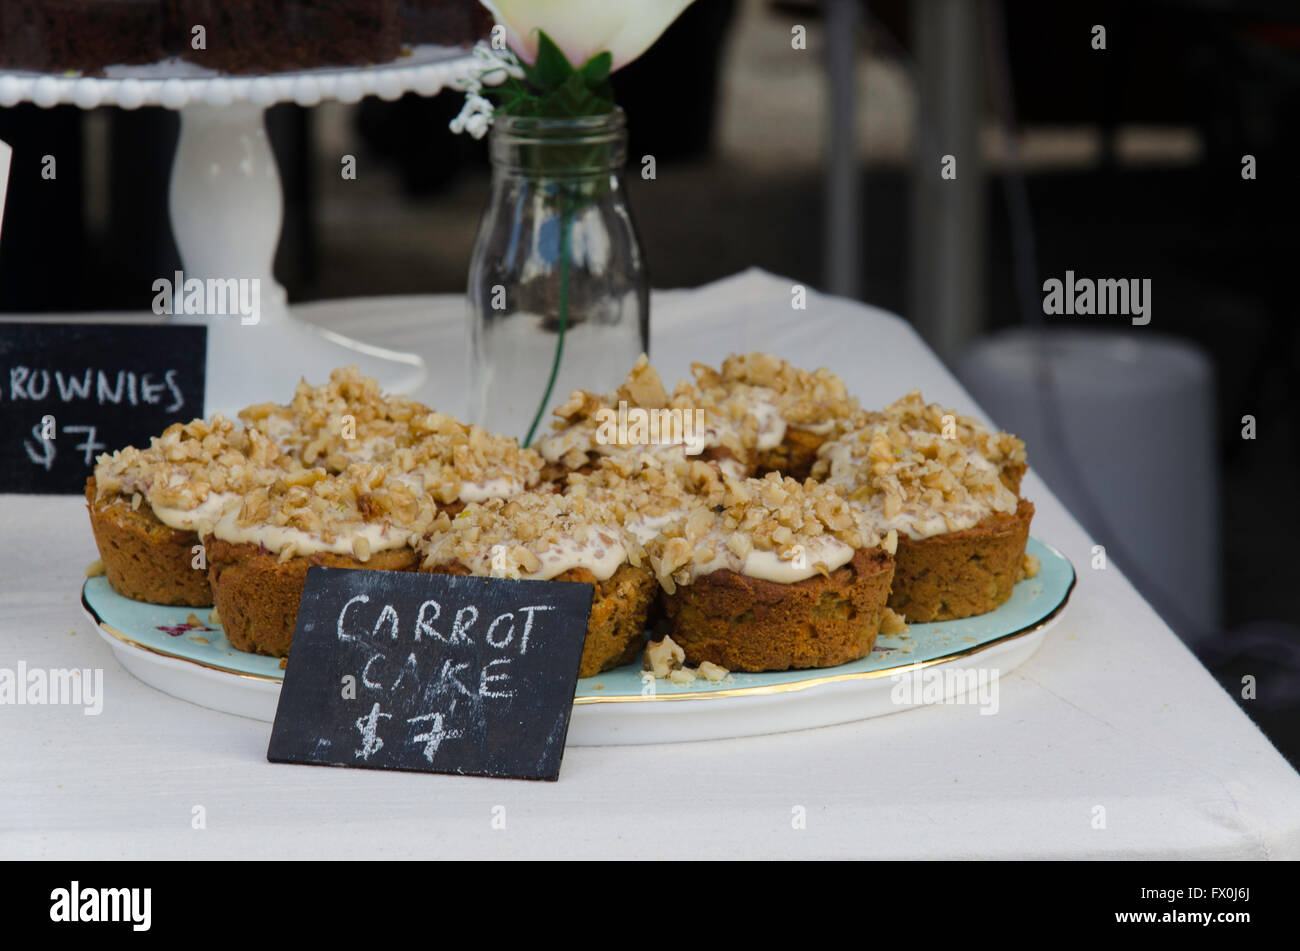 Carrot cake at a market stall in Sydney Stock Photo